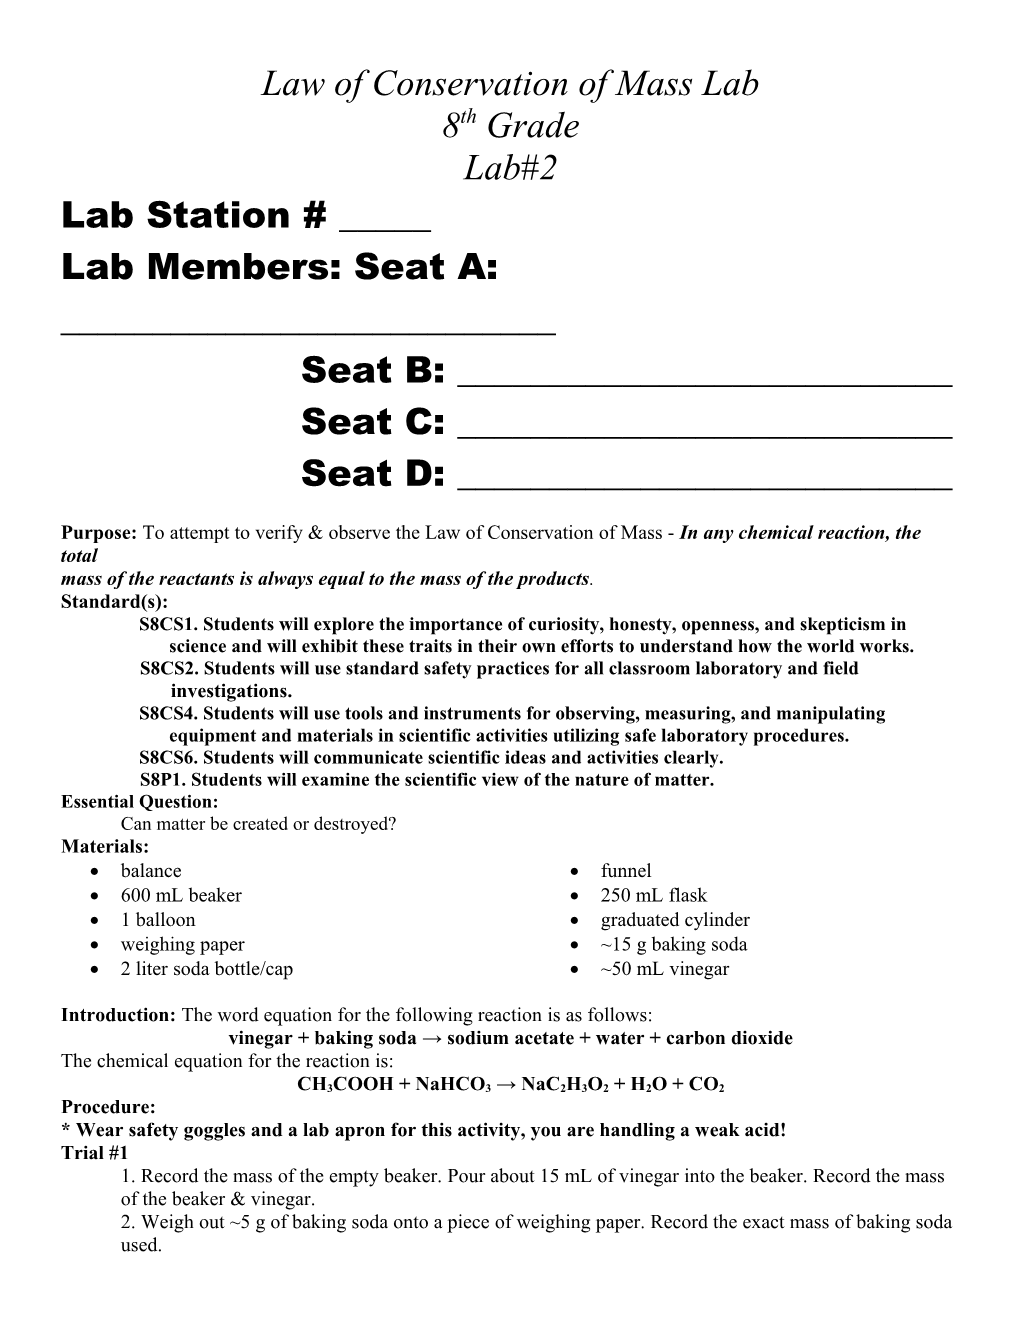 Law of Conservation of Mass Lab